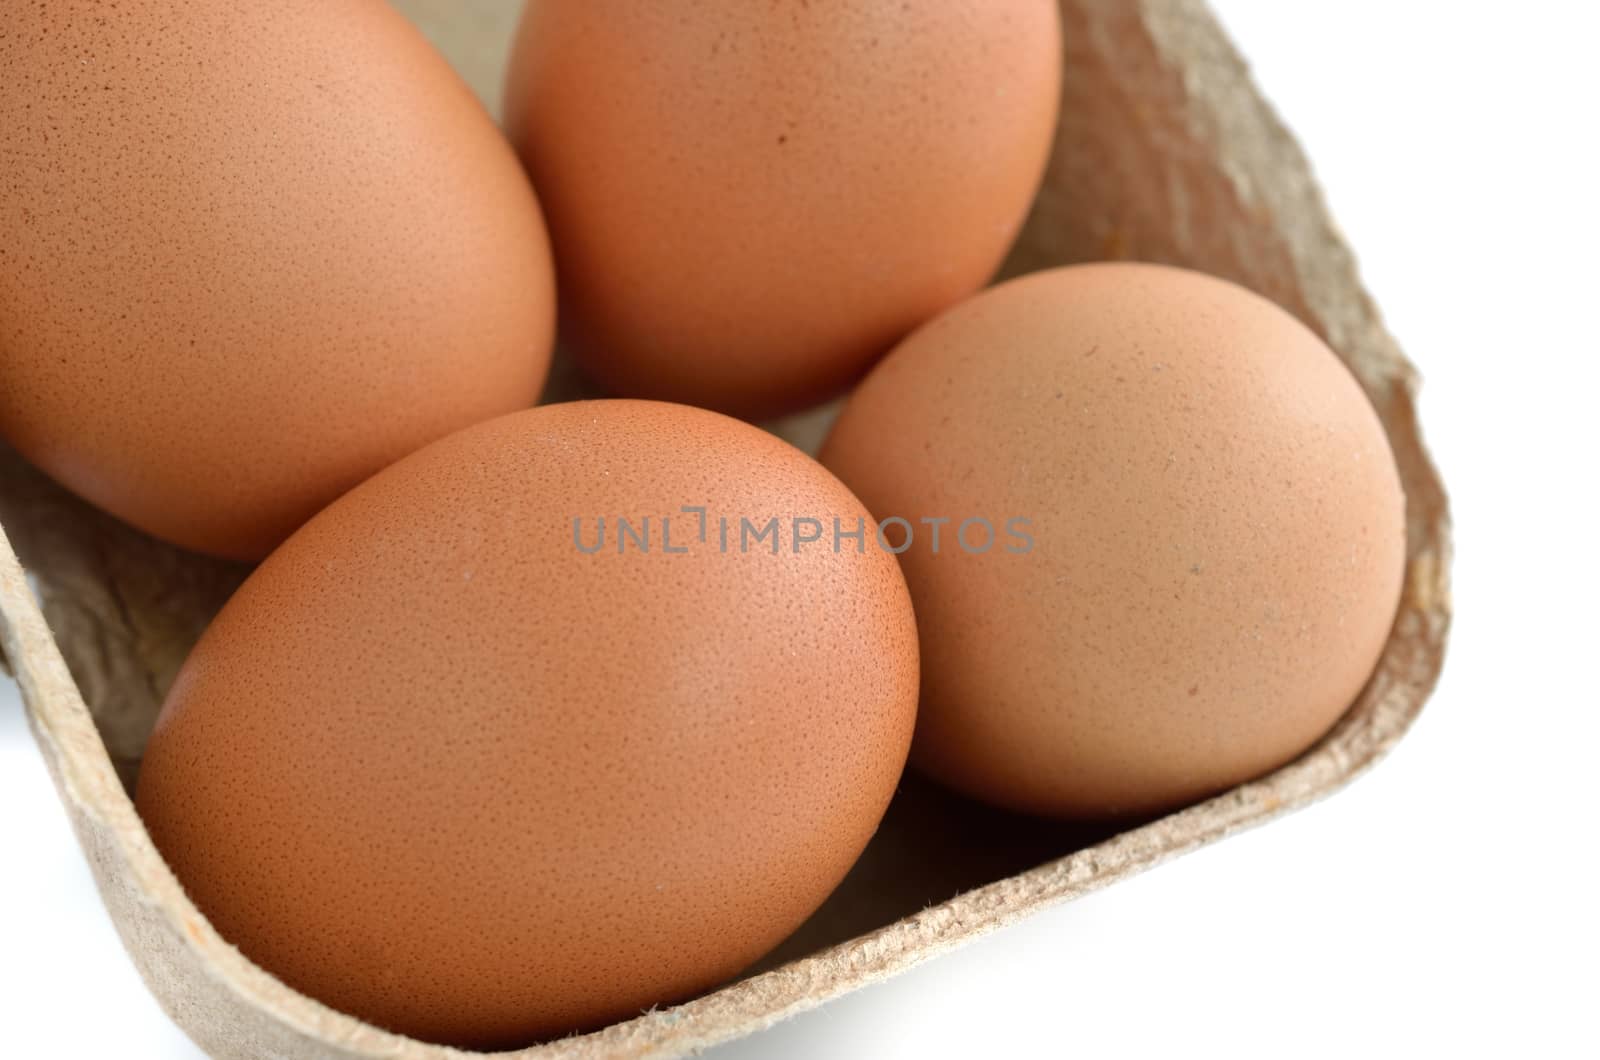 eggs in a paper box isolated on white